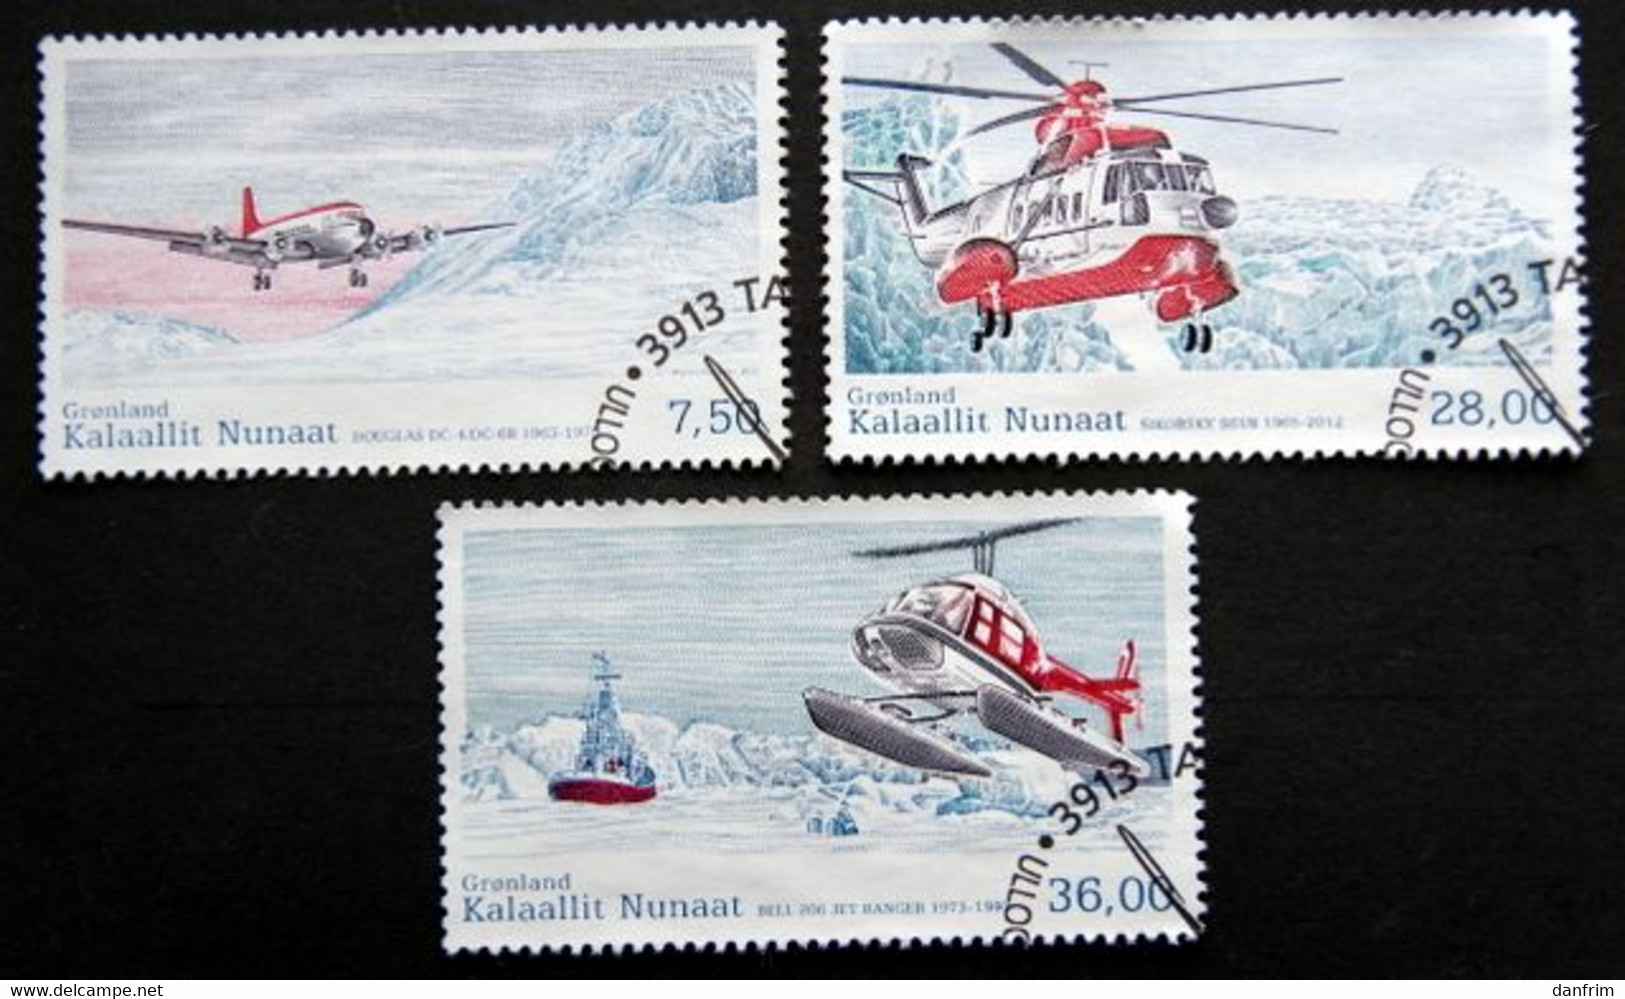 Greenland   2012  Greenland Civil Aviation History II   Minr,619-21 Helicopter   ( Lot G 2552 ) - Used Stamps